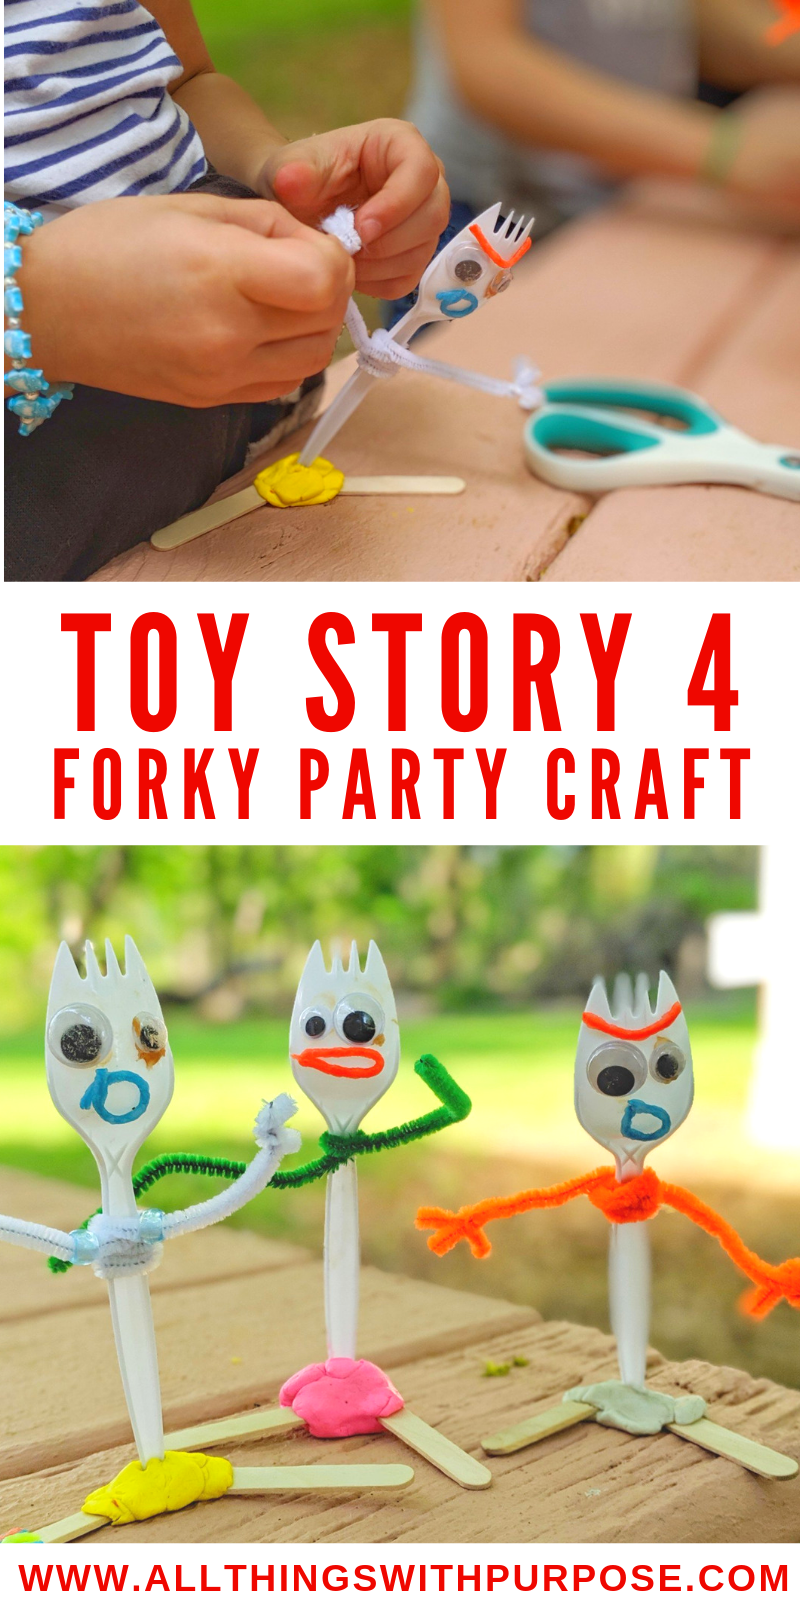 How To Make Forky from Toy Story 4 + Free Printable